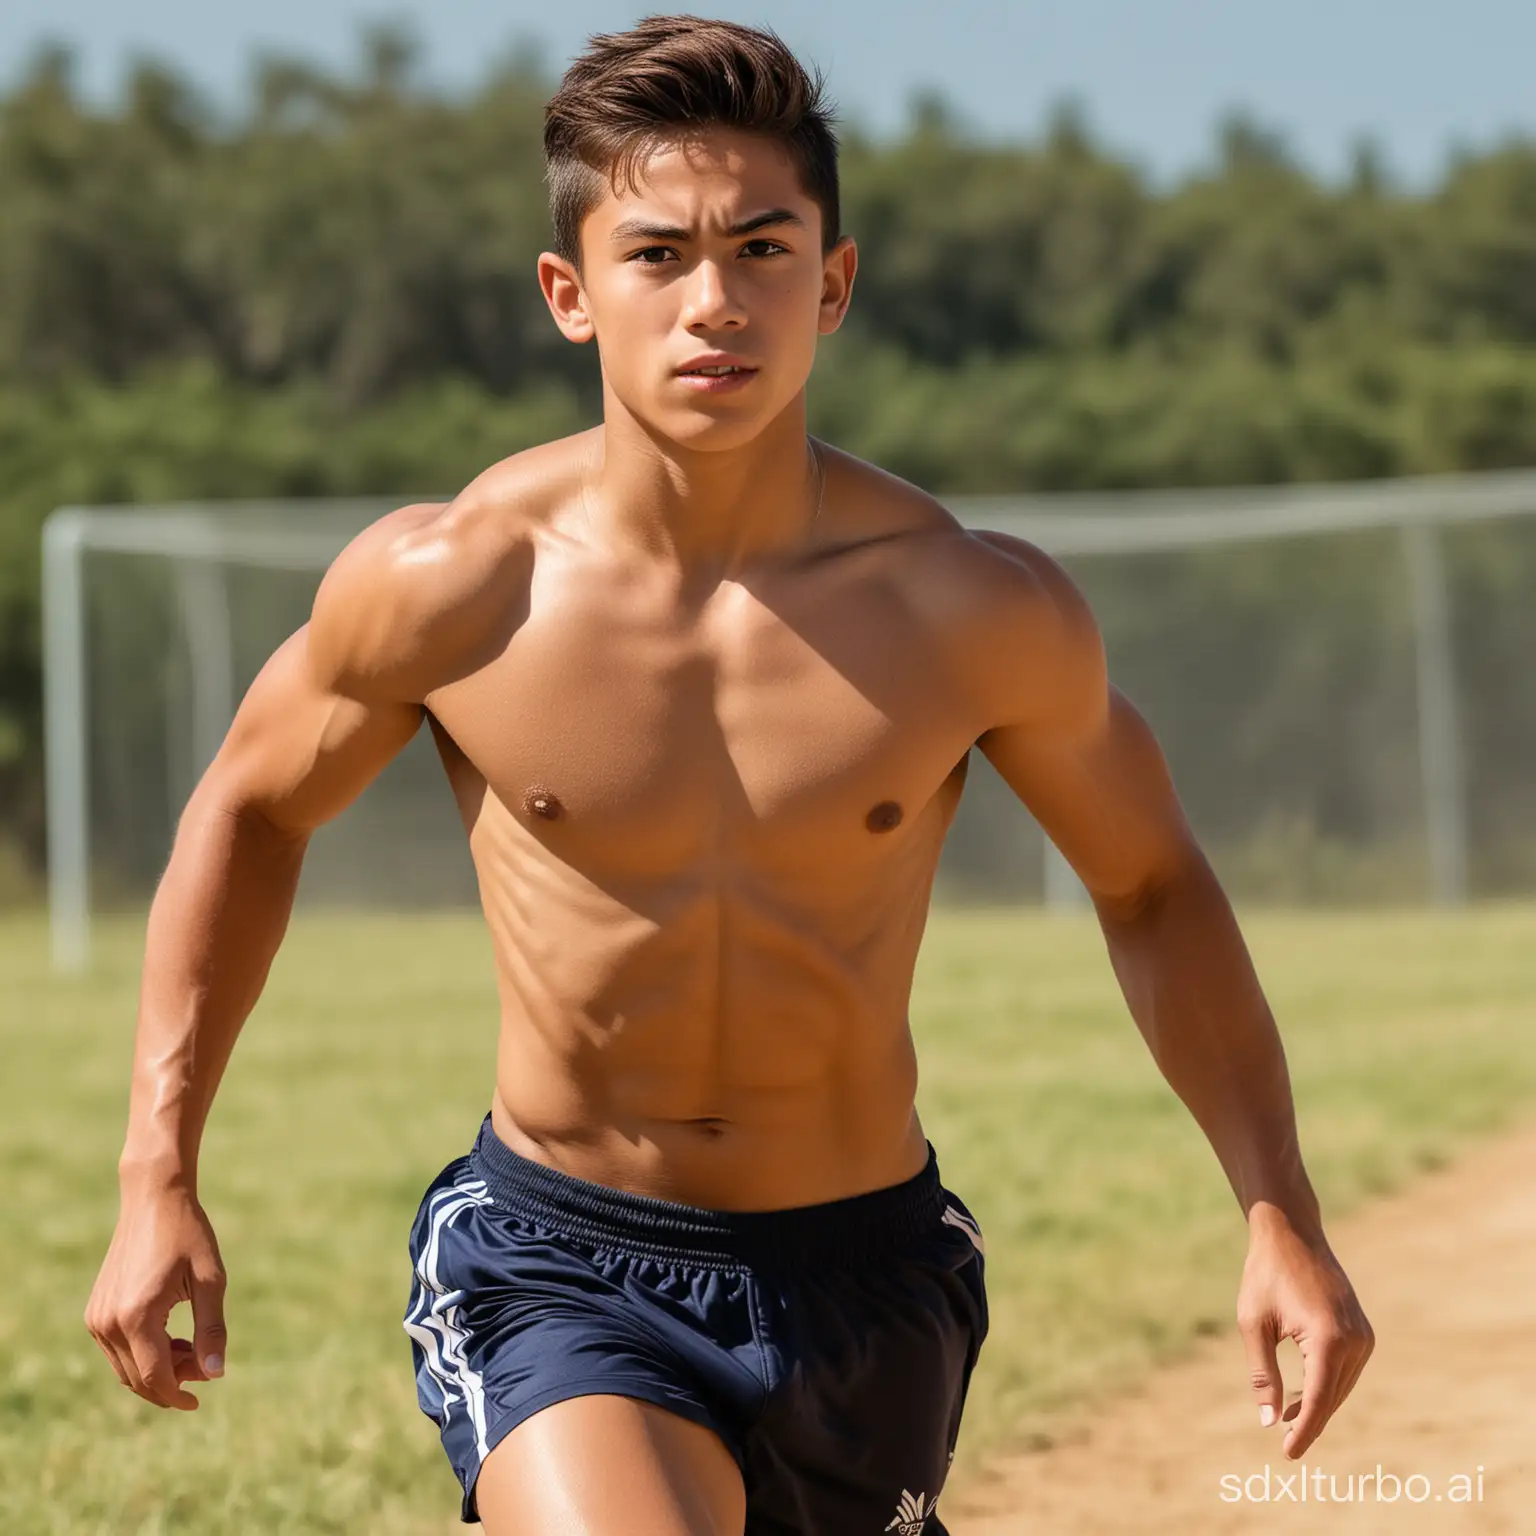 a shirtless 13 years old Bodybuilding boy track and fueld running arround a soccer field, running pose, athletic muscle tone, dynamic active running pose, lean man with light tan skin, sprinting, athlete photography, sports photo, athletic boy in his 10s, stride, sport photography, muscular legs, slender and muscular build, track and field, running, standing athletic pose, polynesian god, strong young boy, giga-size chest